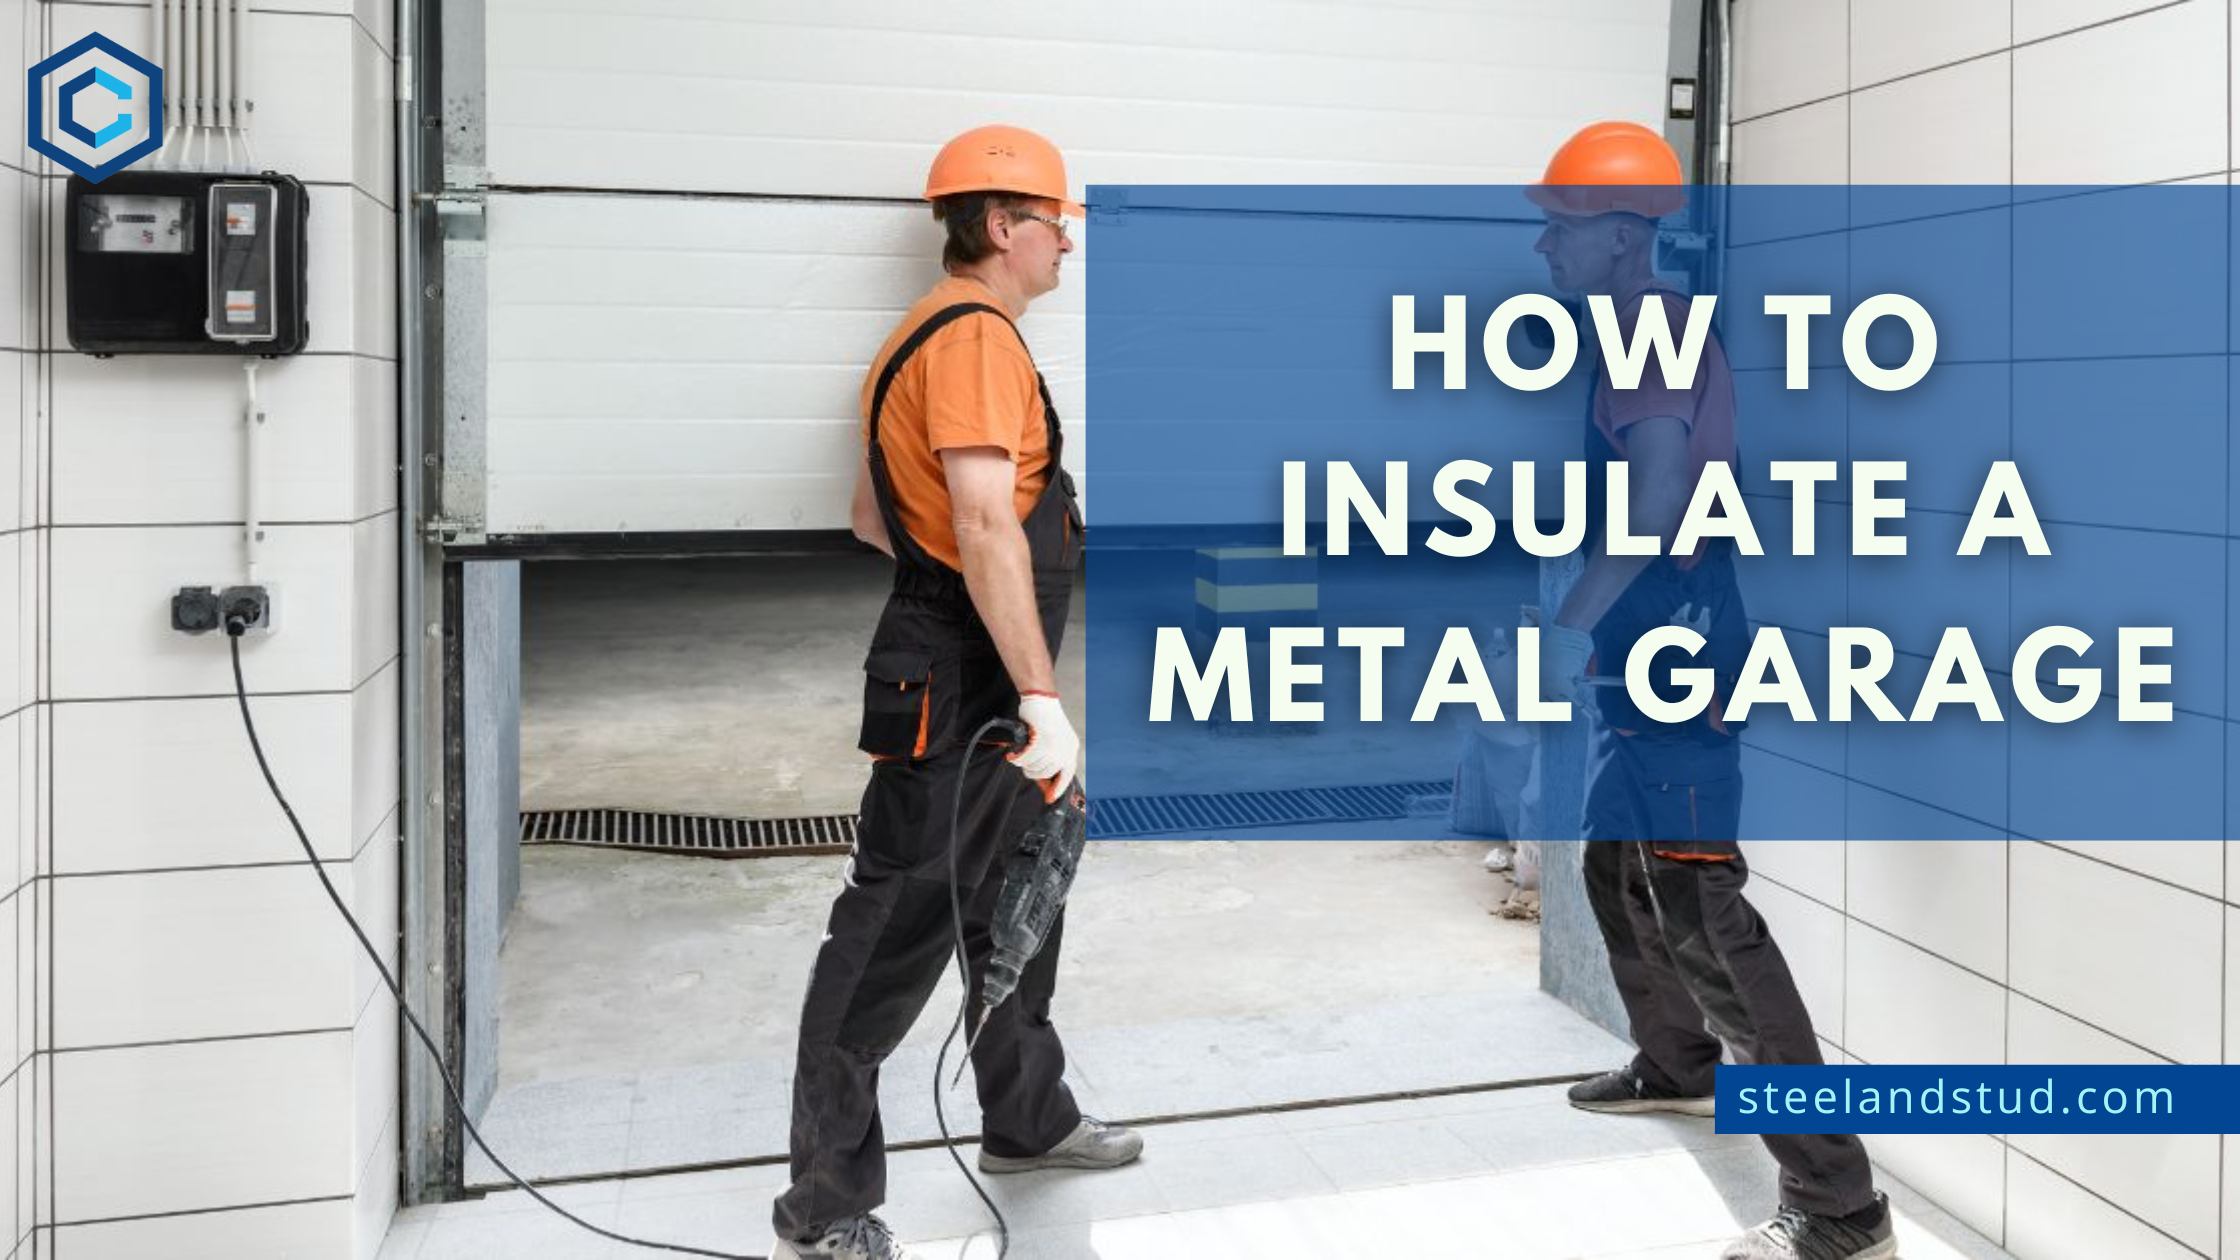 How to Insulate a Metal Garage